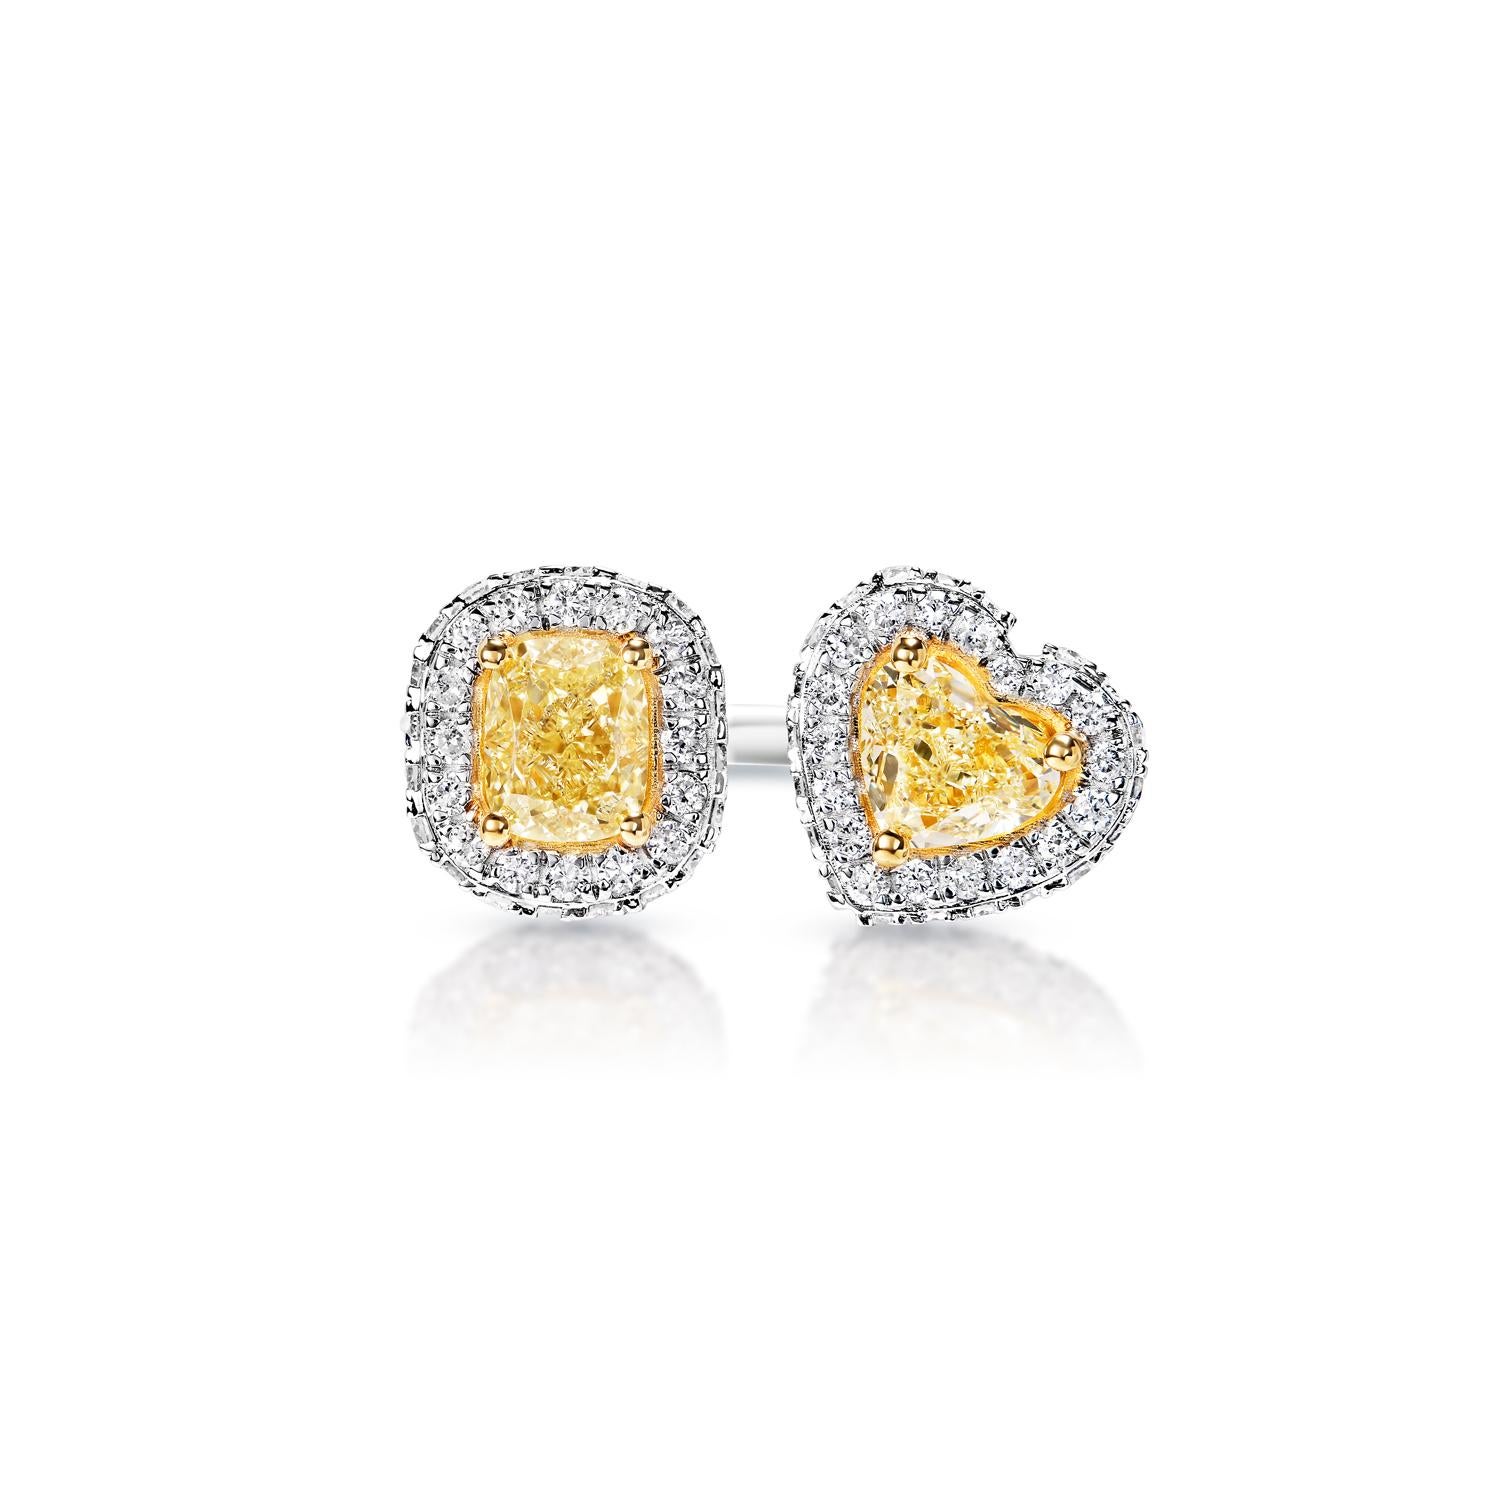 Center Diamond:

Carat Weight: 2.73 Carats
Color : Yellow
Style: Combine Mix Shape


Ring:
Settings: Halo, Sidestone
Metal: 18k White Gold
Size: Can be adjusted to any size.
Style: Toi Et Moi Ring

Total Carat Weight: 2.73 Carats